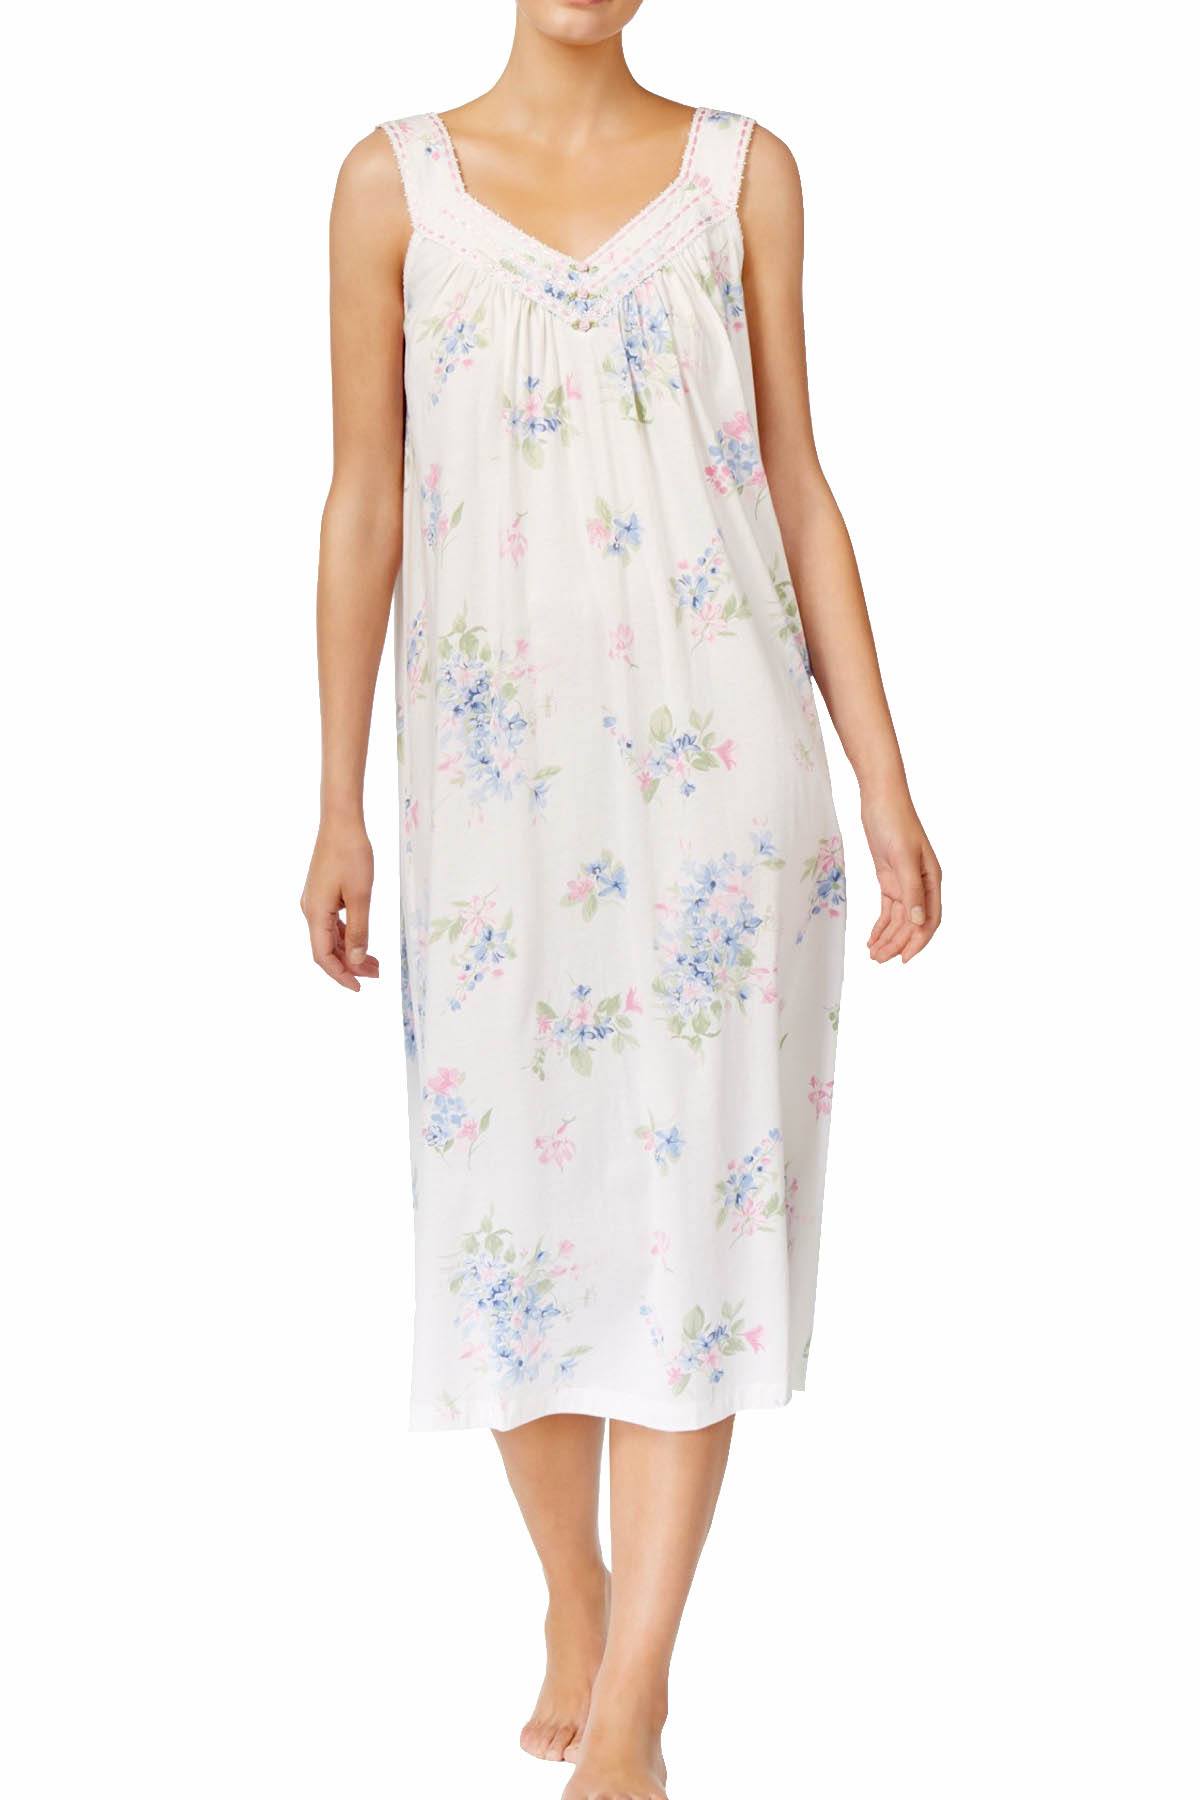 Charter Club Intimates Fall-Floral Printed Cotton-Knit Nightgown ...